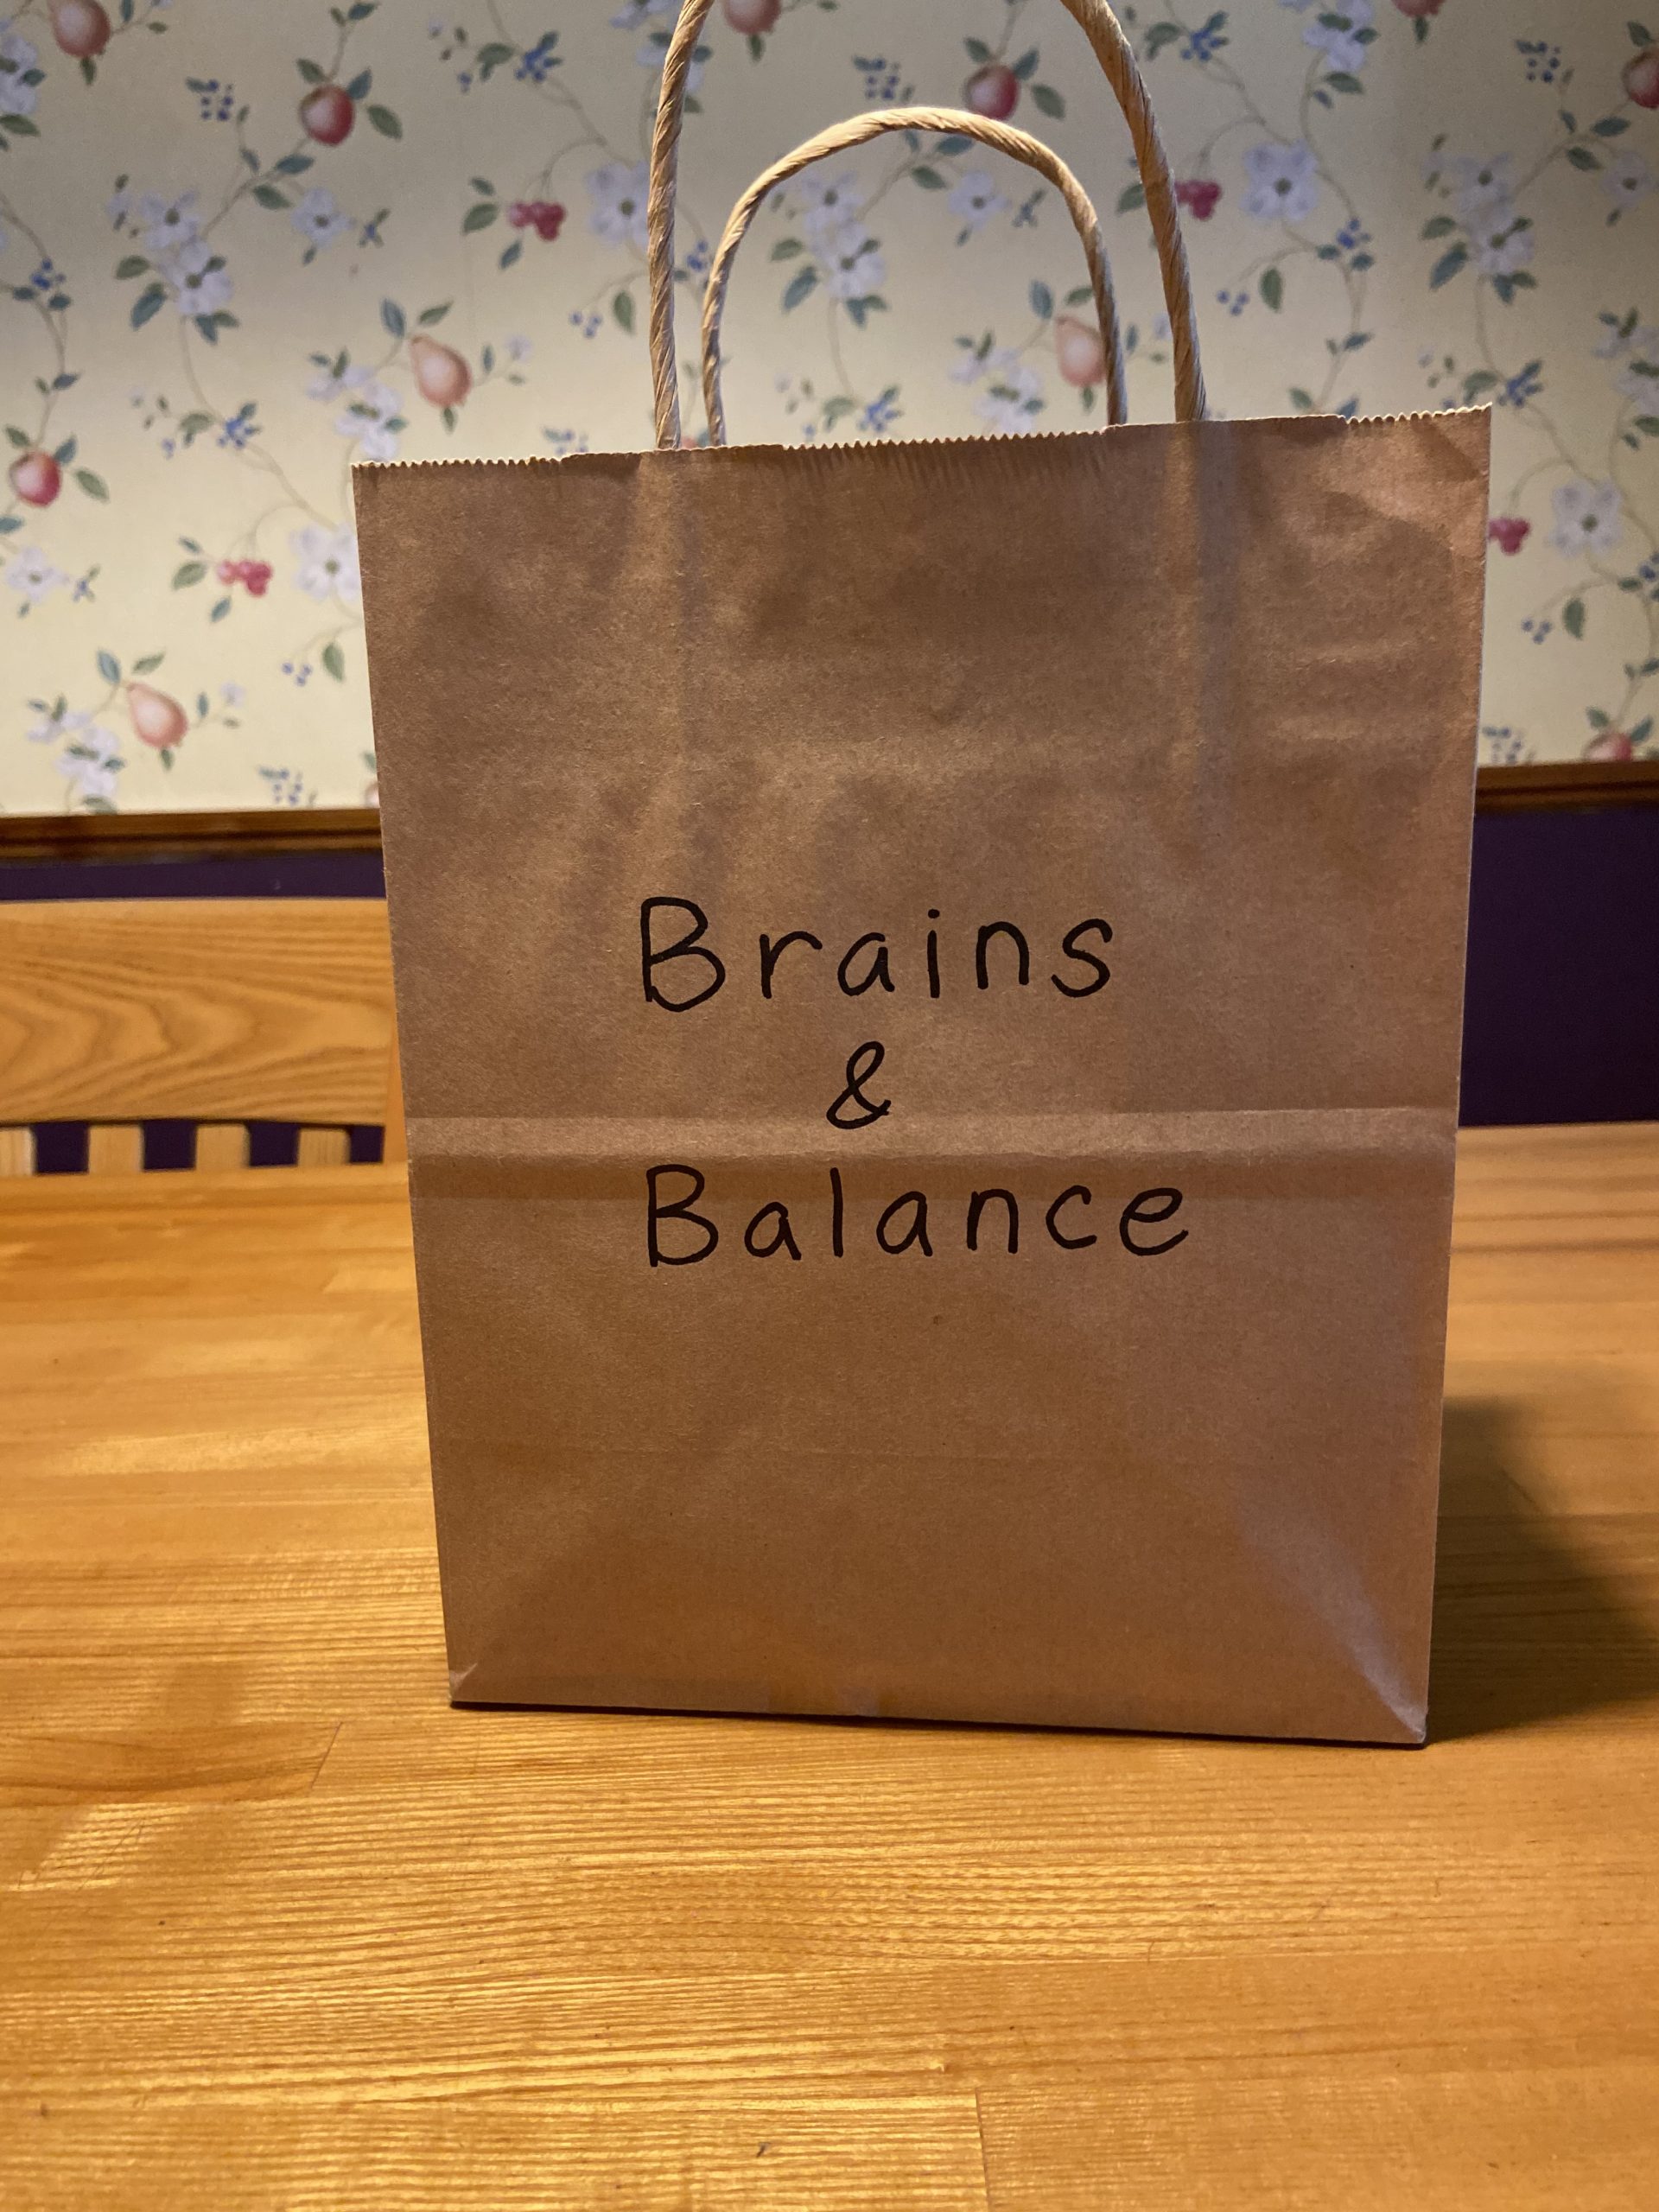 A photo of a brown paper bag with "Brains & Balance" written on the bag